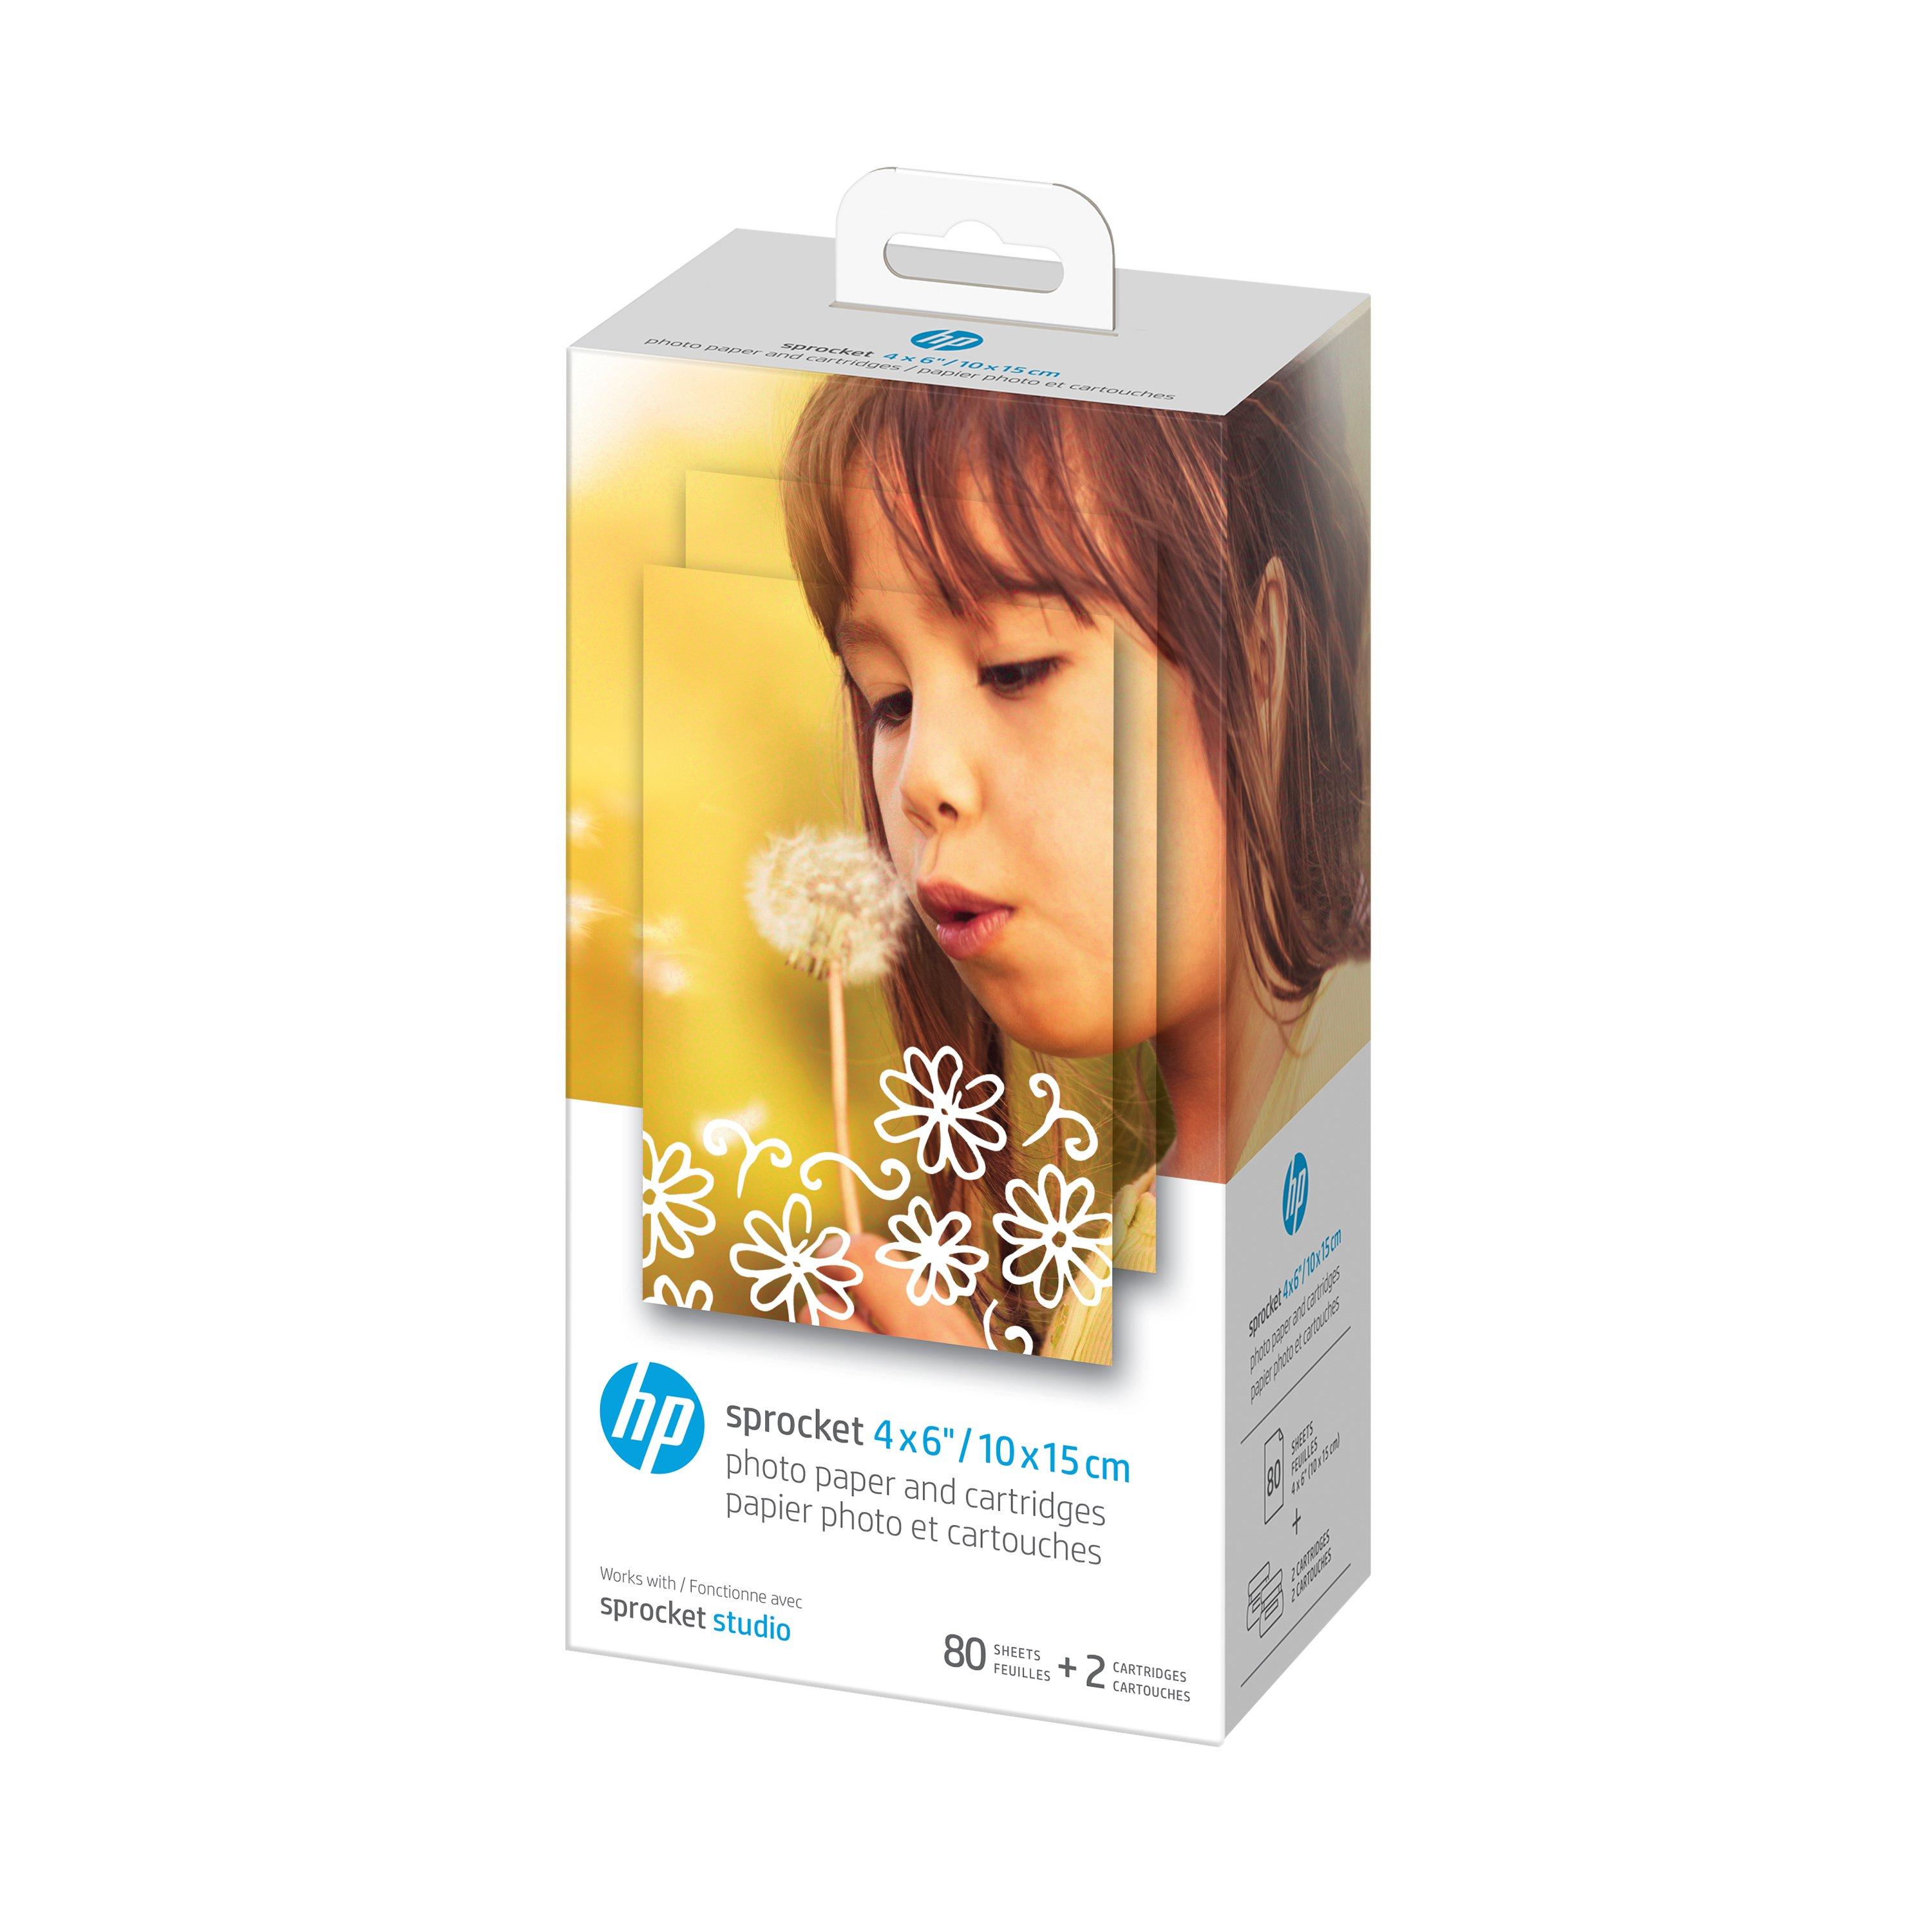 list item 1 of 3 HP Sprocket 4 x 6 Photo Paper 80 Pack with 2 Cartridges